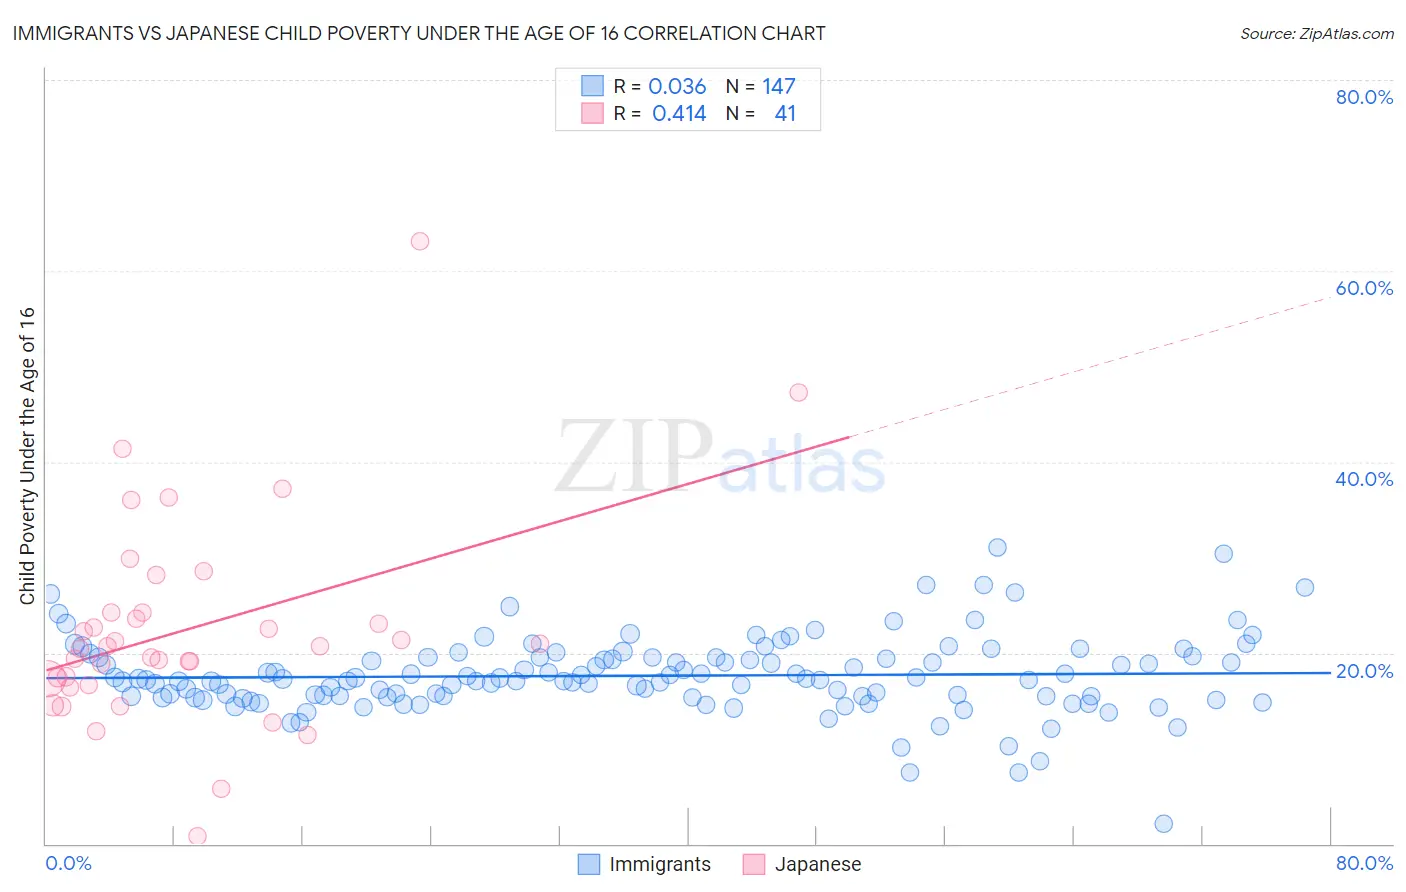 Immigrants vs Japanese Child Poverty Under the Age of 16